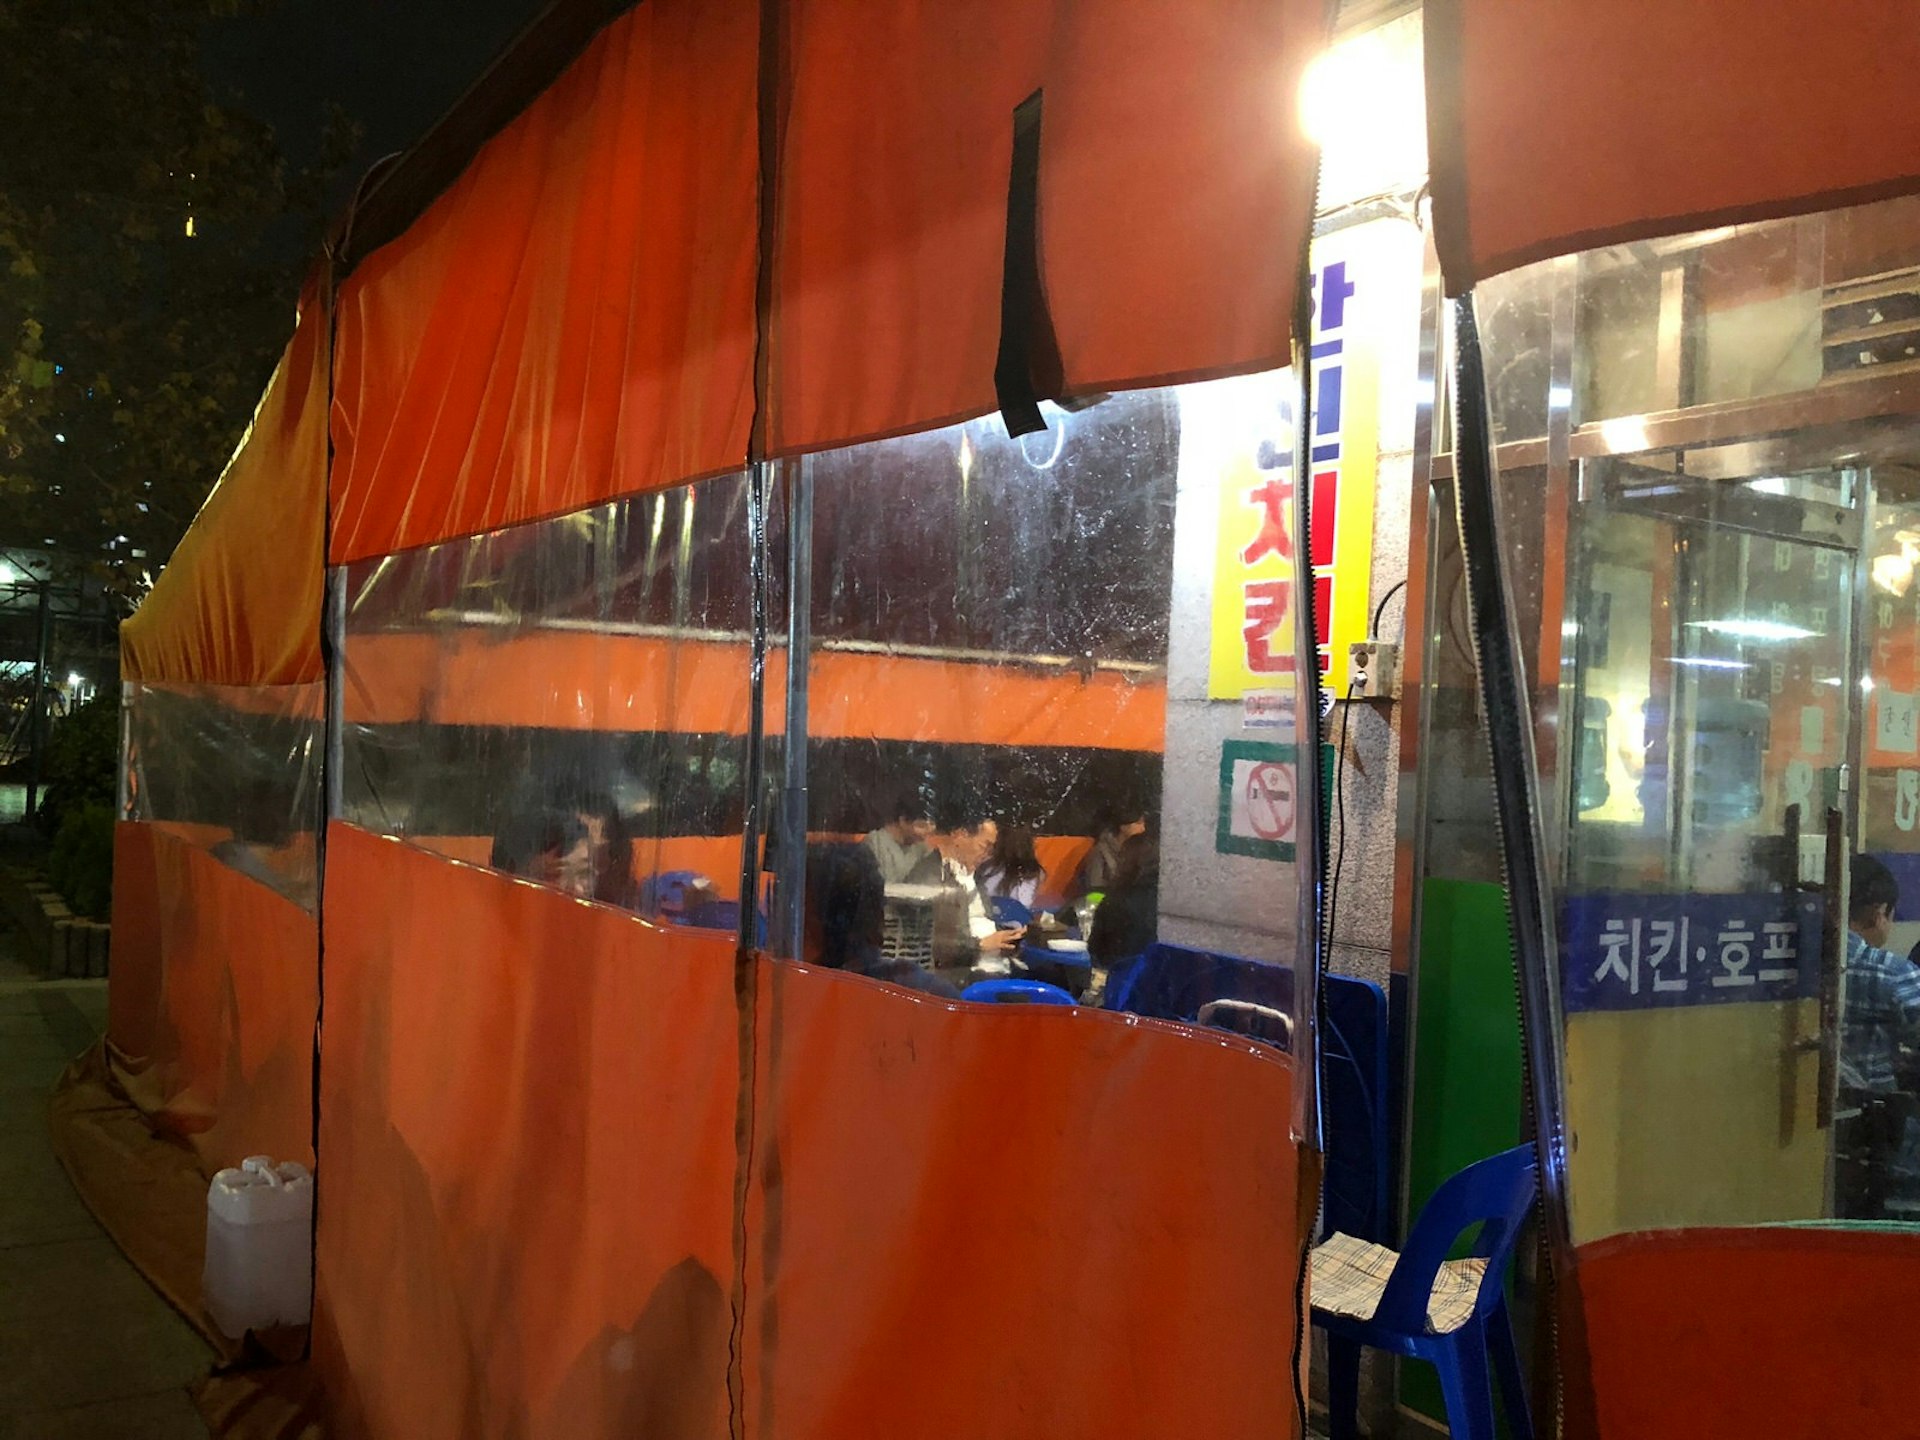 An orange tent with windows looking in to diners and an illuminated sign in Korean script